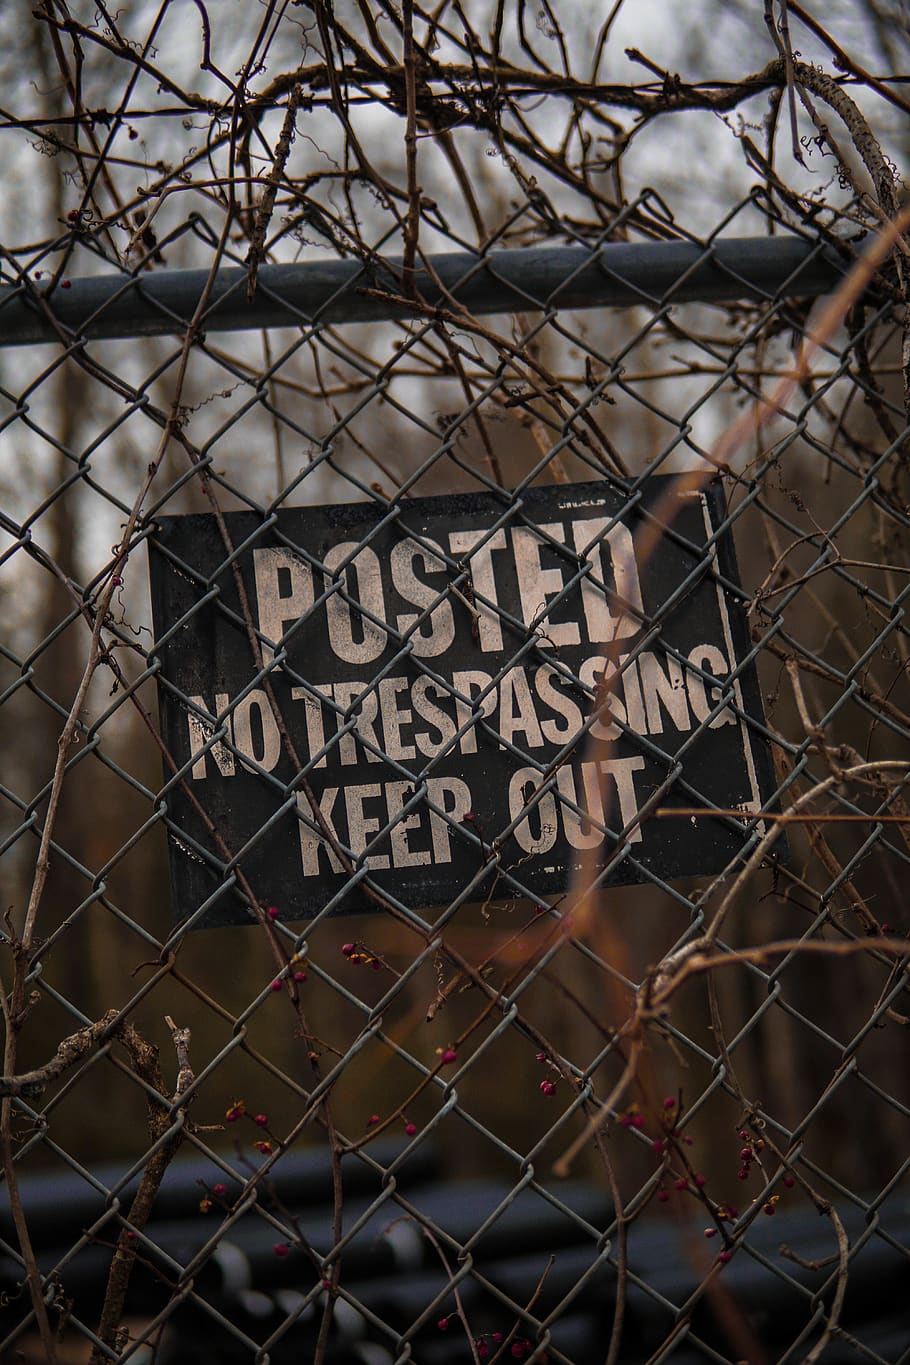 Posted No Trespassing Keep Out signage, text, label, fence, sticker, HD wallpaper